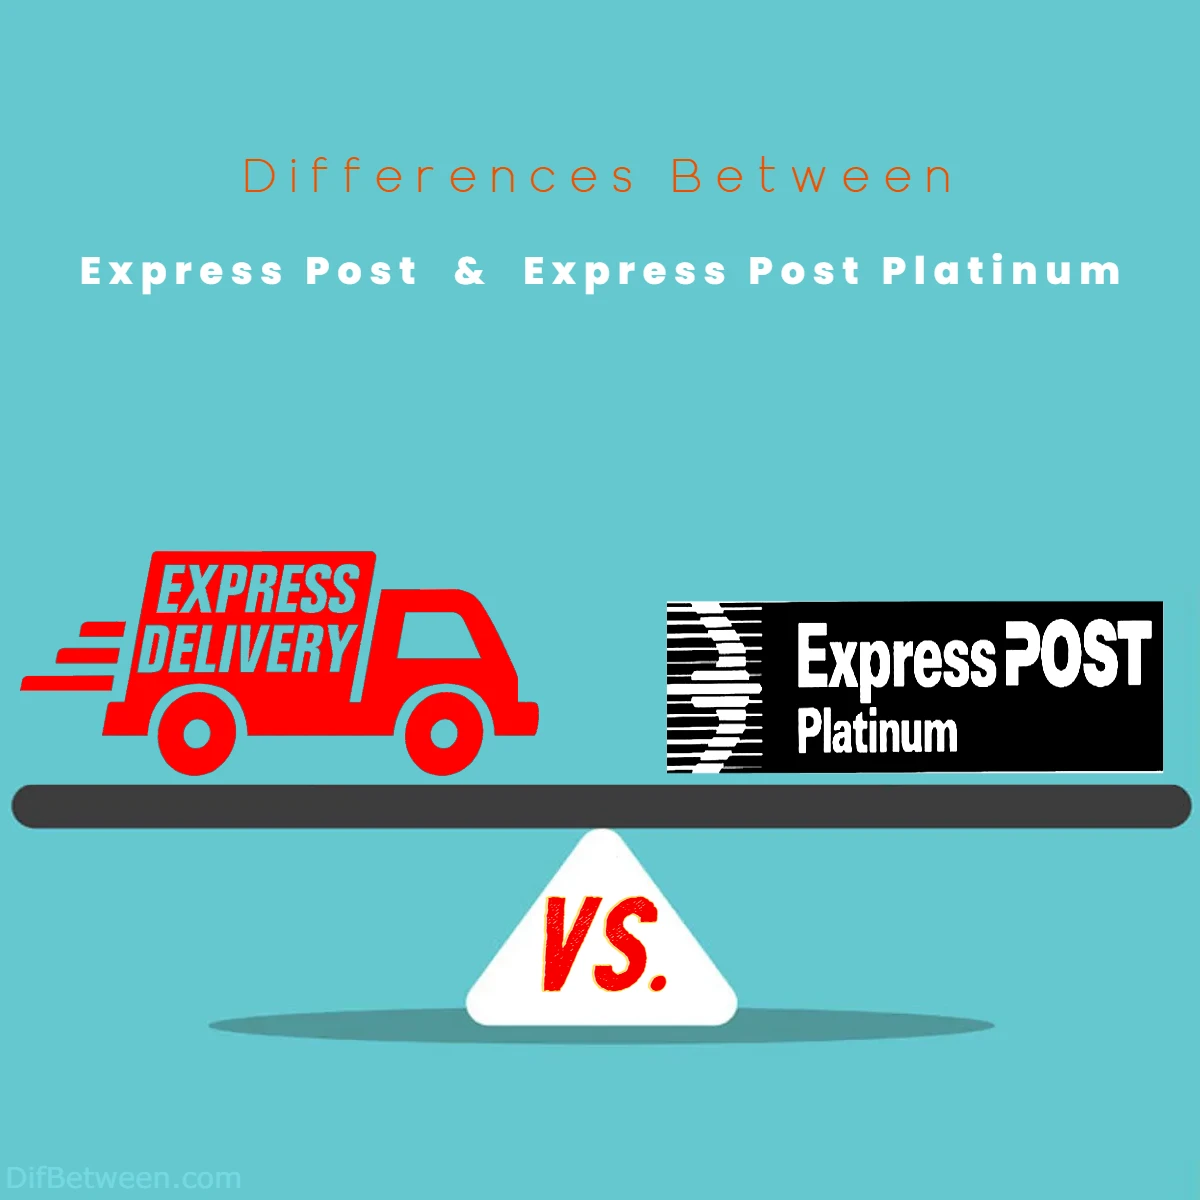 Differences Between Express Post vs Express Post Platinum